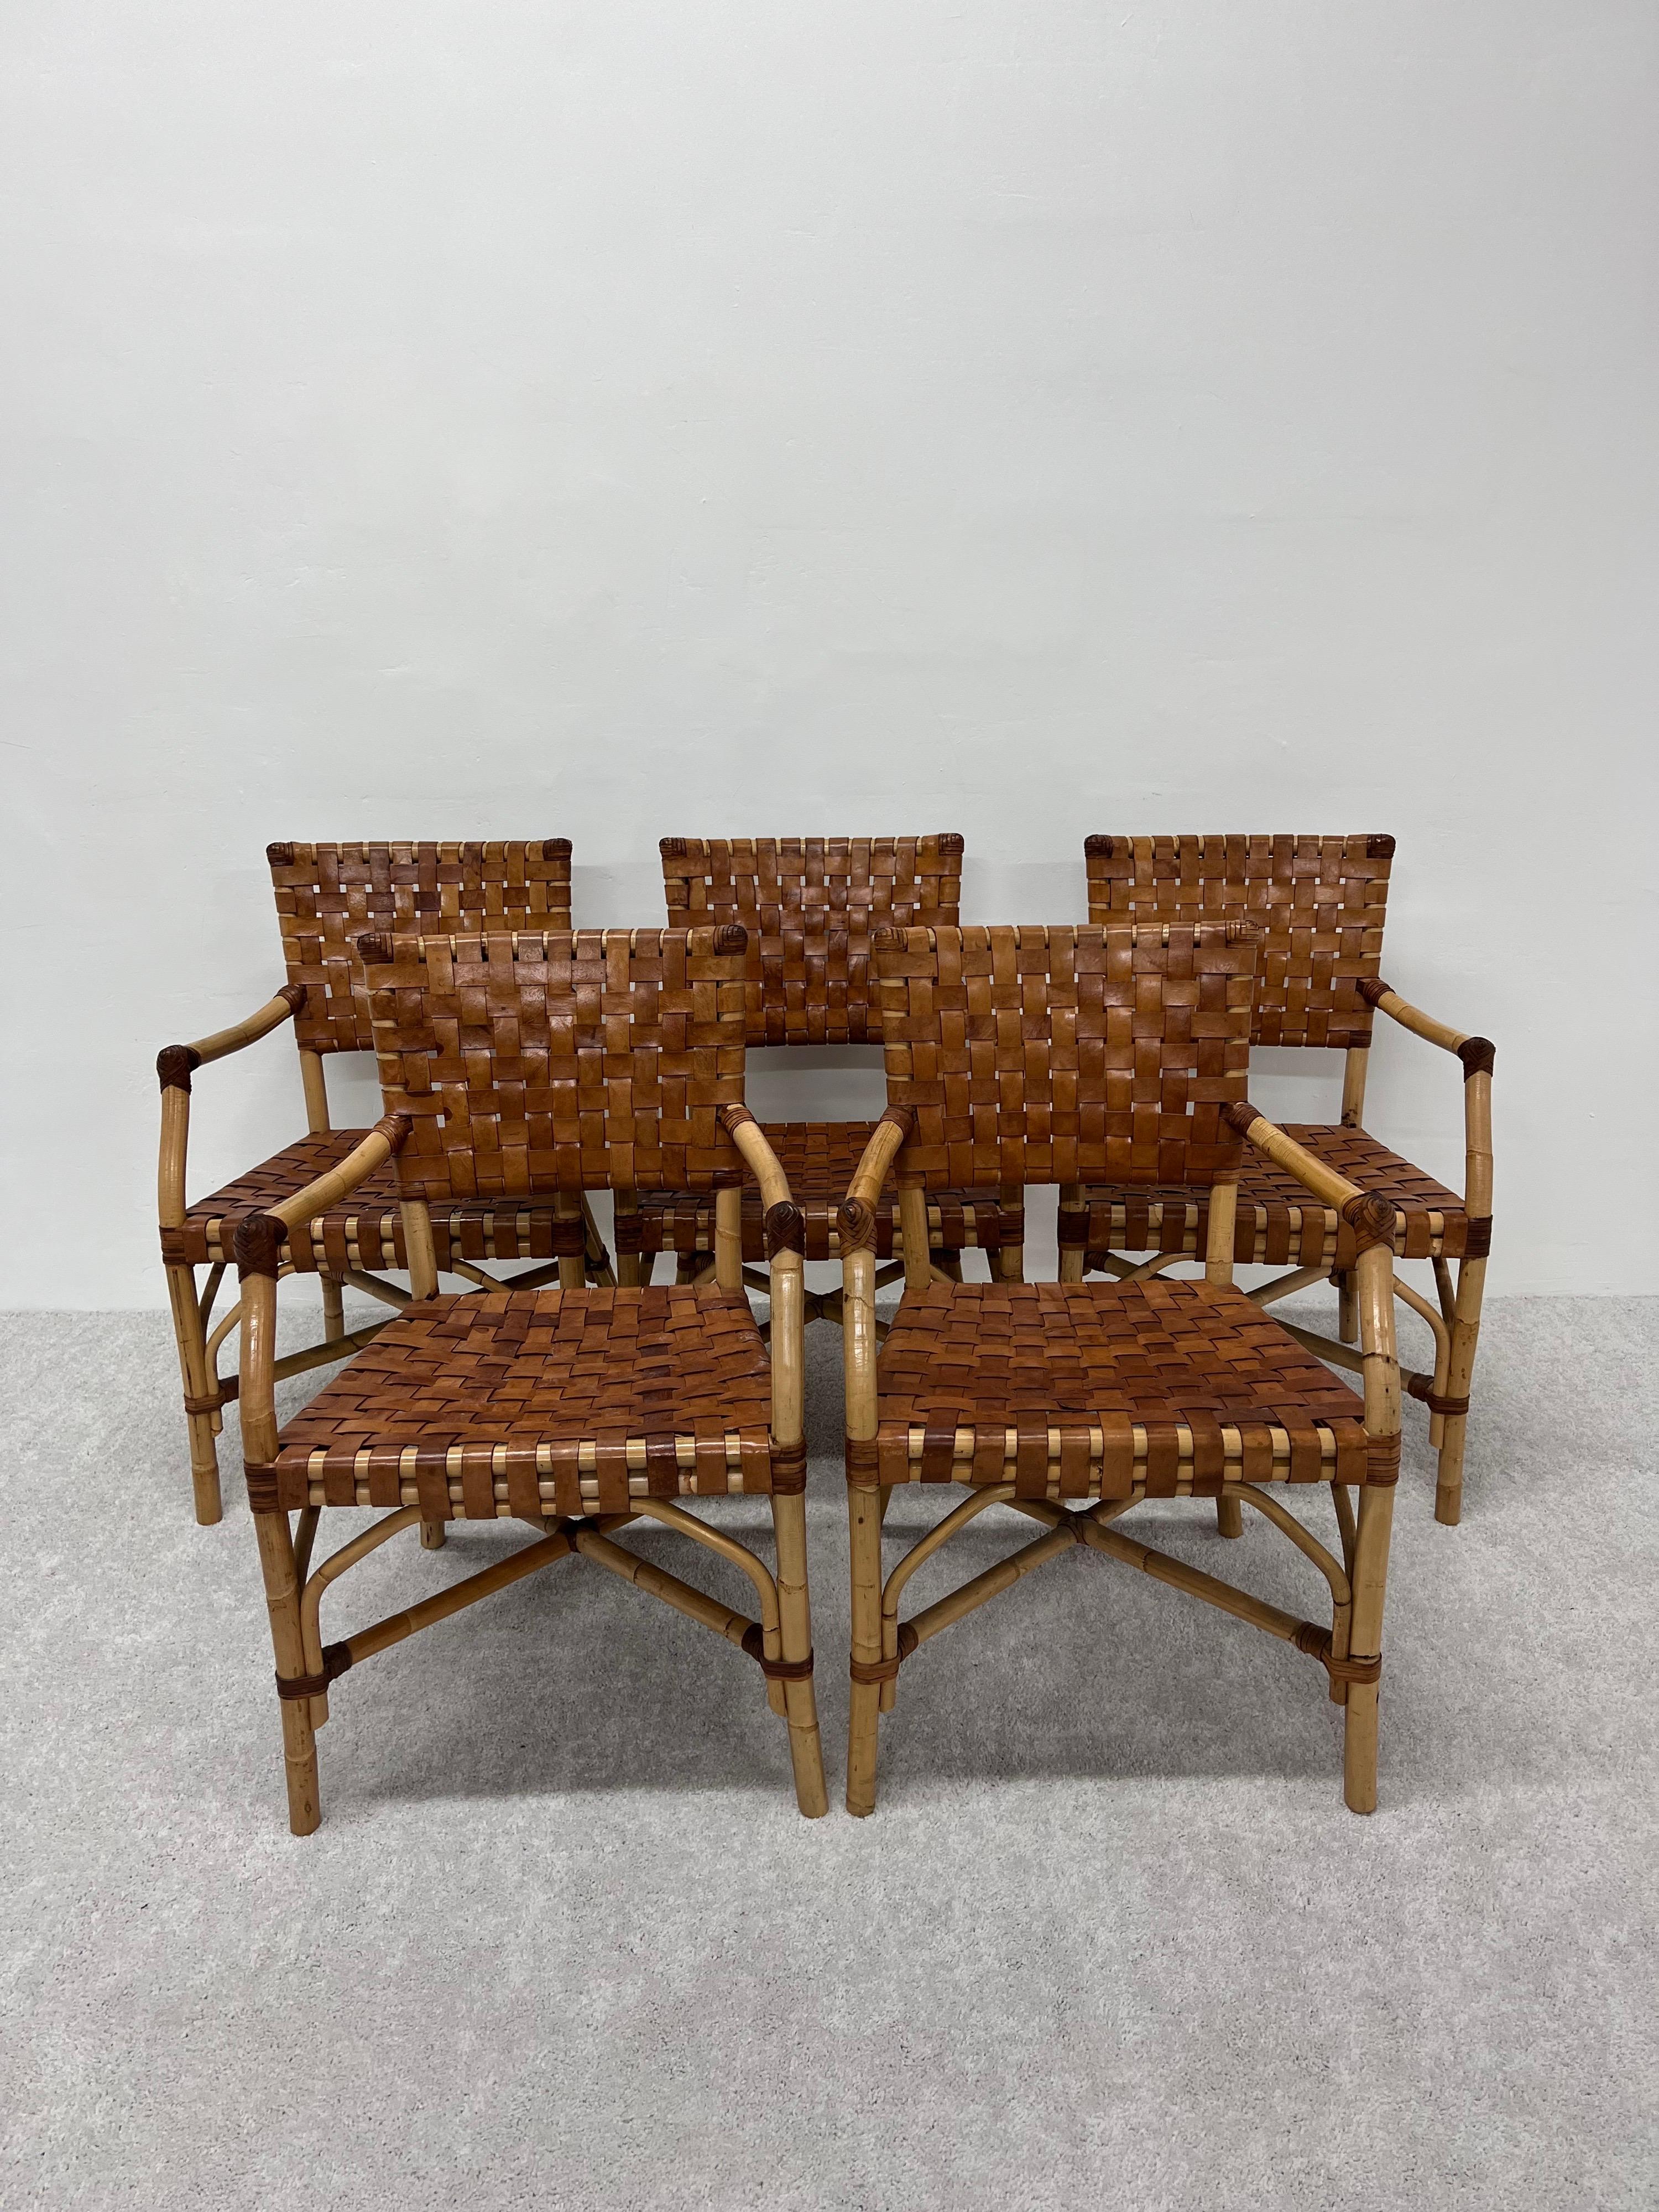 Set of five woven leather and bamboo dining arm chairs from the 1970s.

Measures: arm height: 26.5